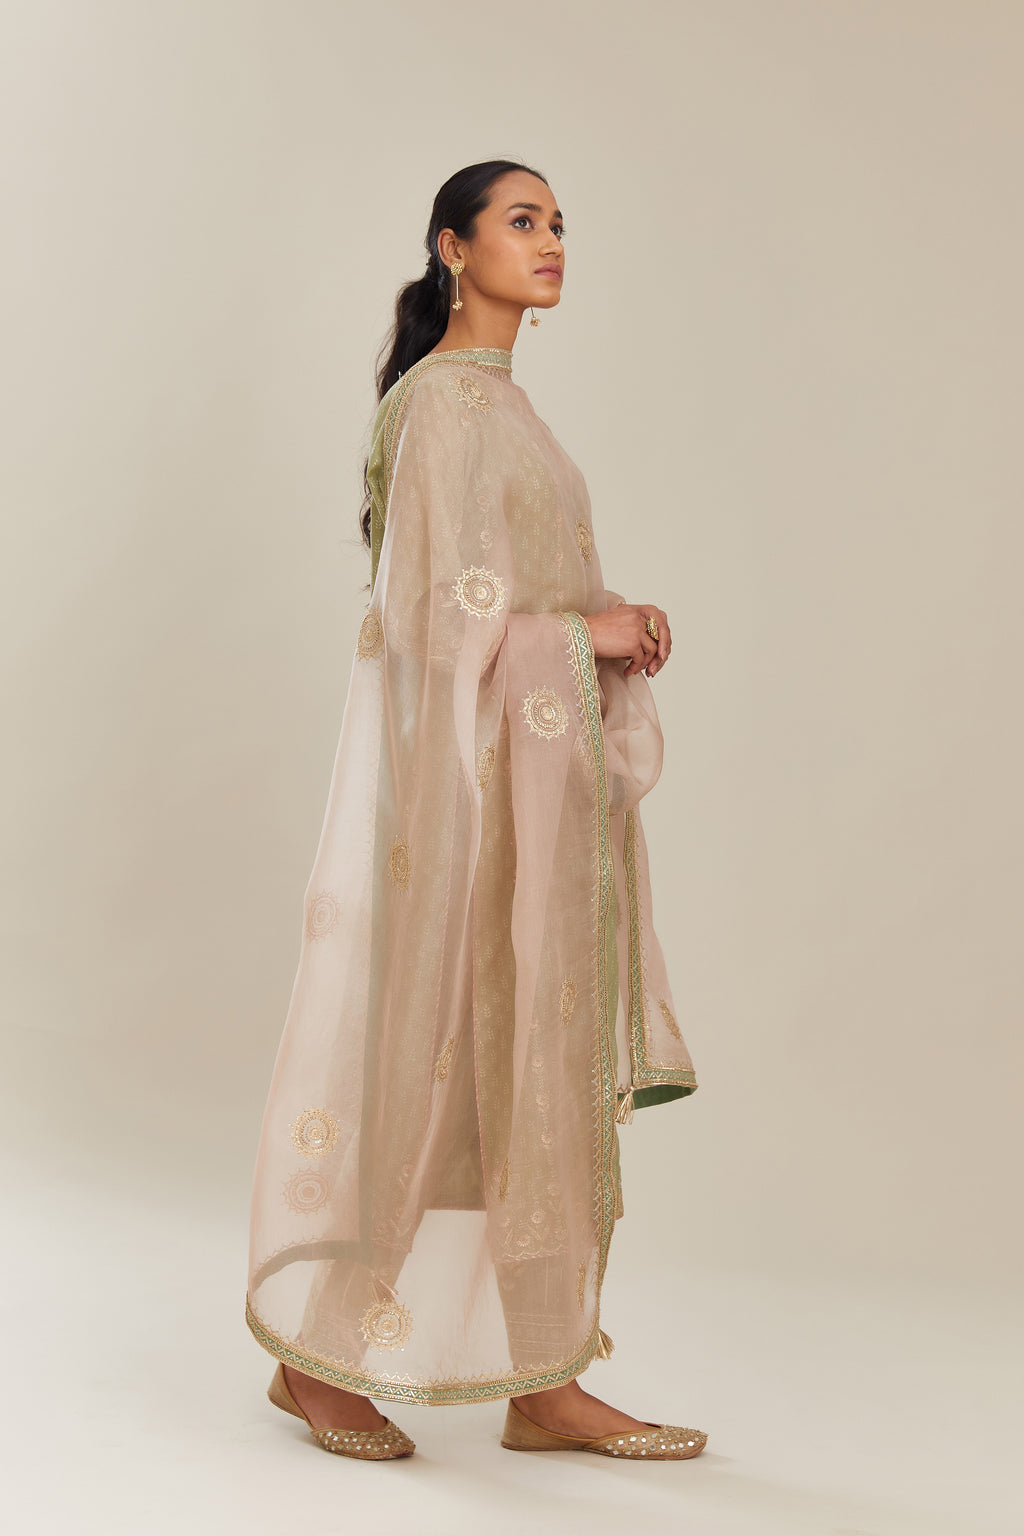 Old rose silk organza dupatta with delicate gold gota embroidery and contrast colored border running along all edges.